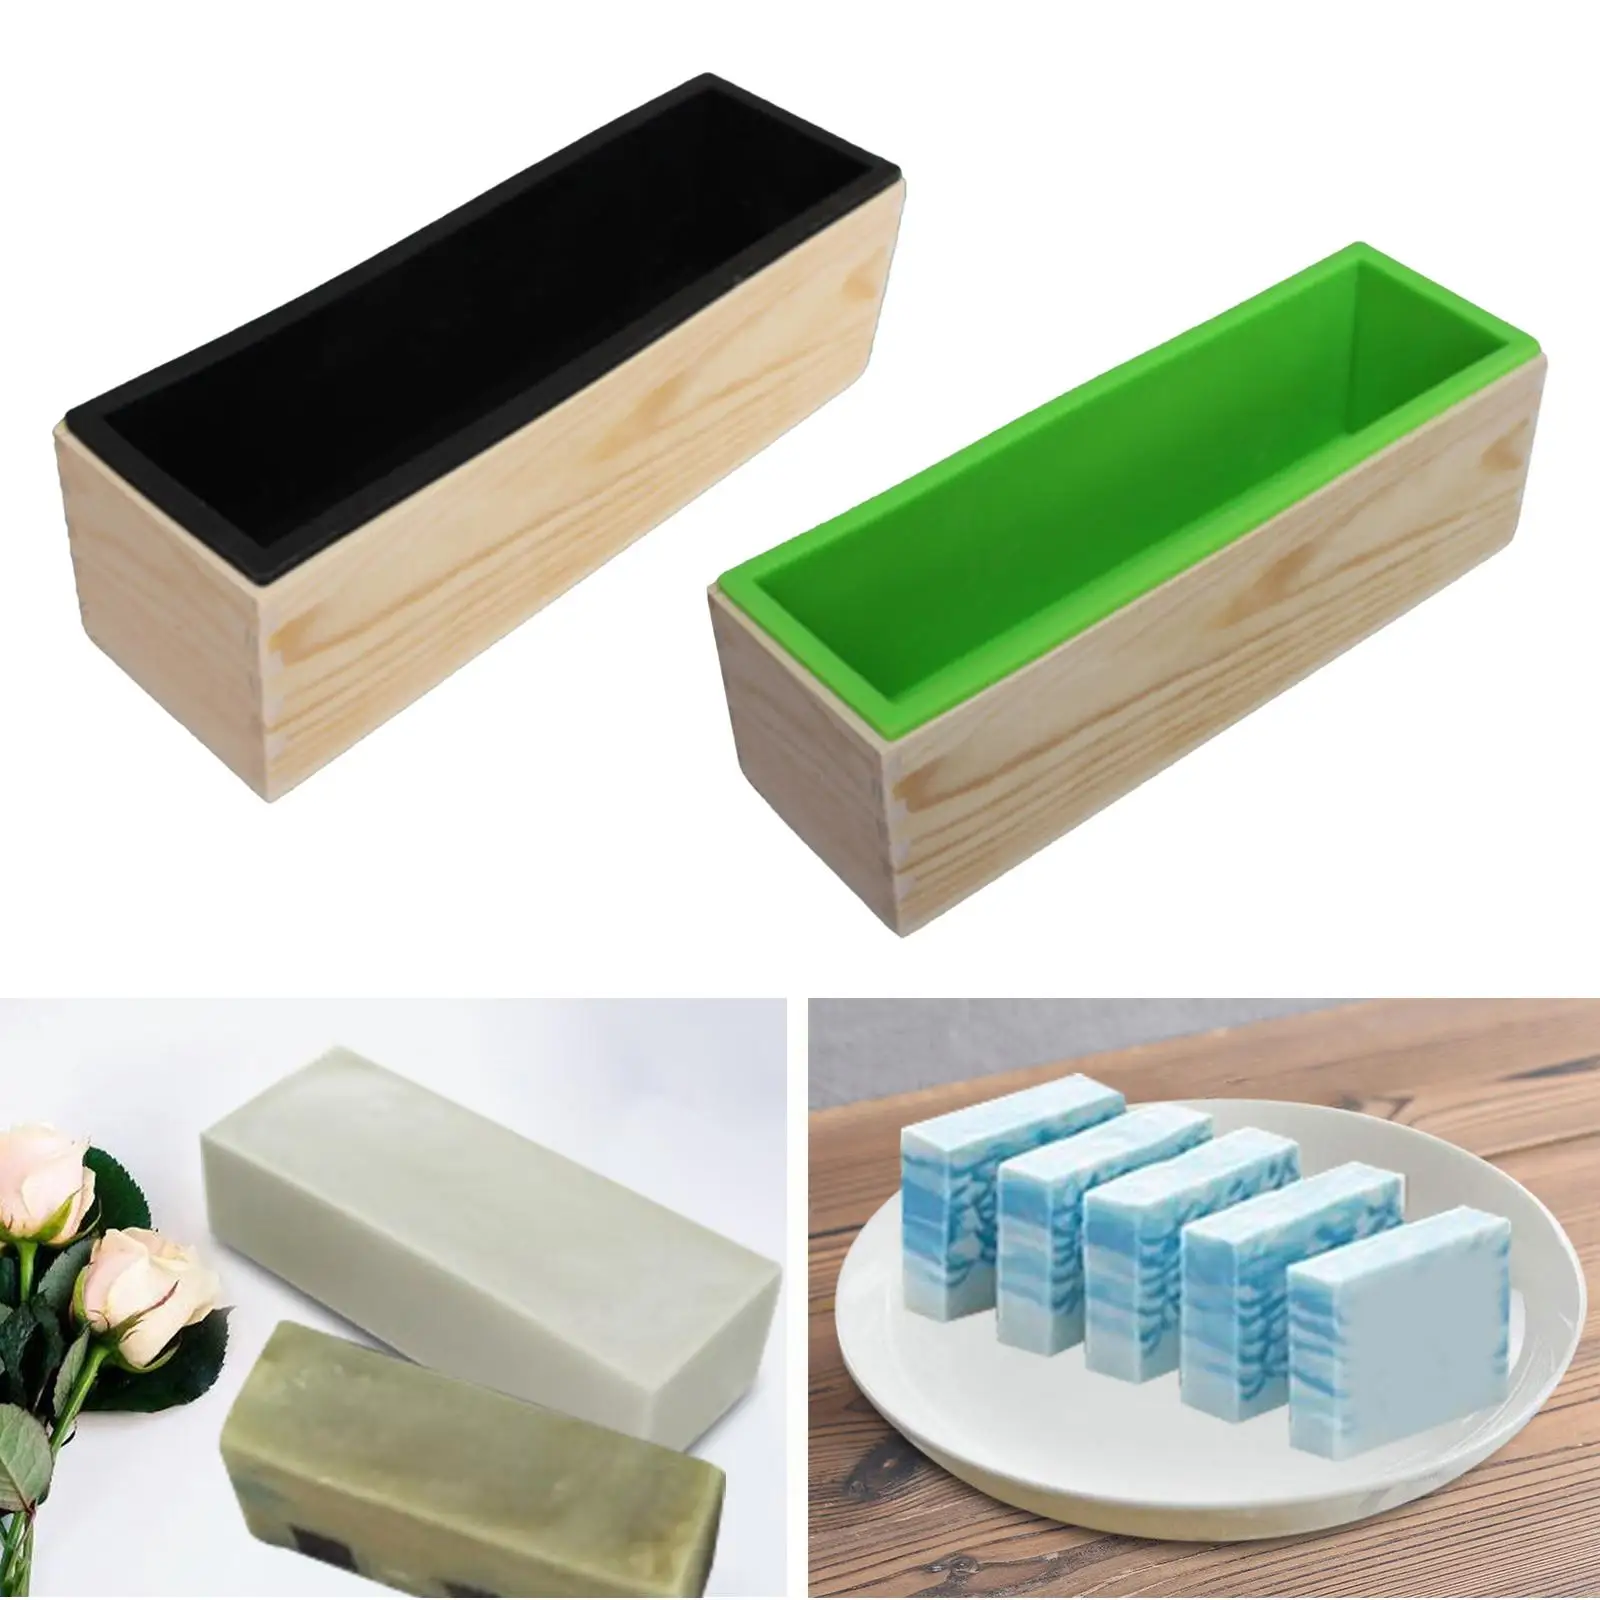 Silicone Soap Making Mould Epoxy Resin Model Rectangle with Wooden Box Handmade DIY Crafts Supplies Tool